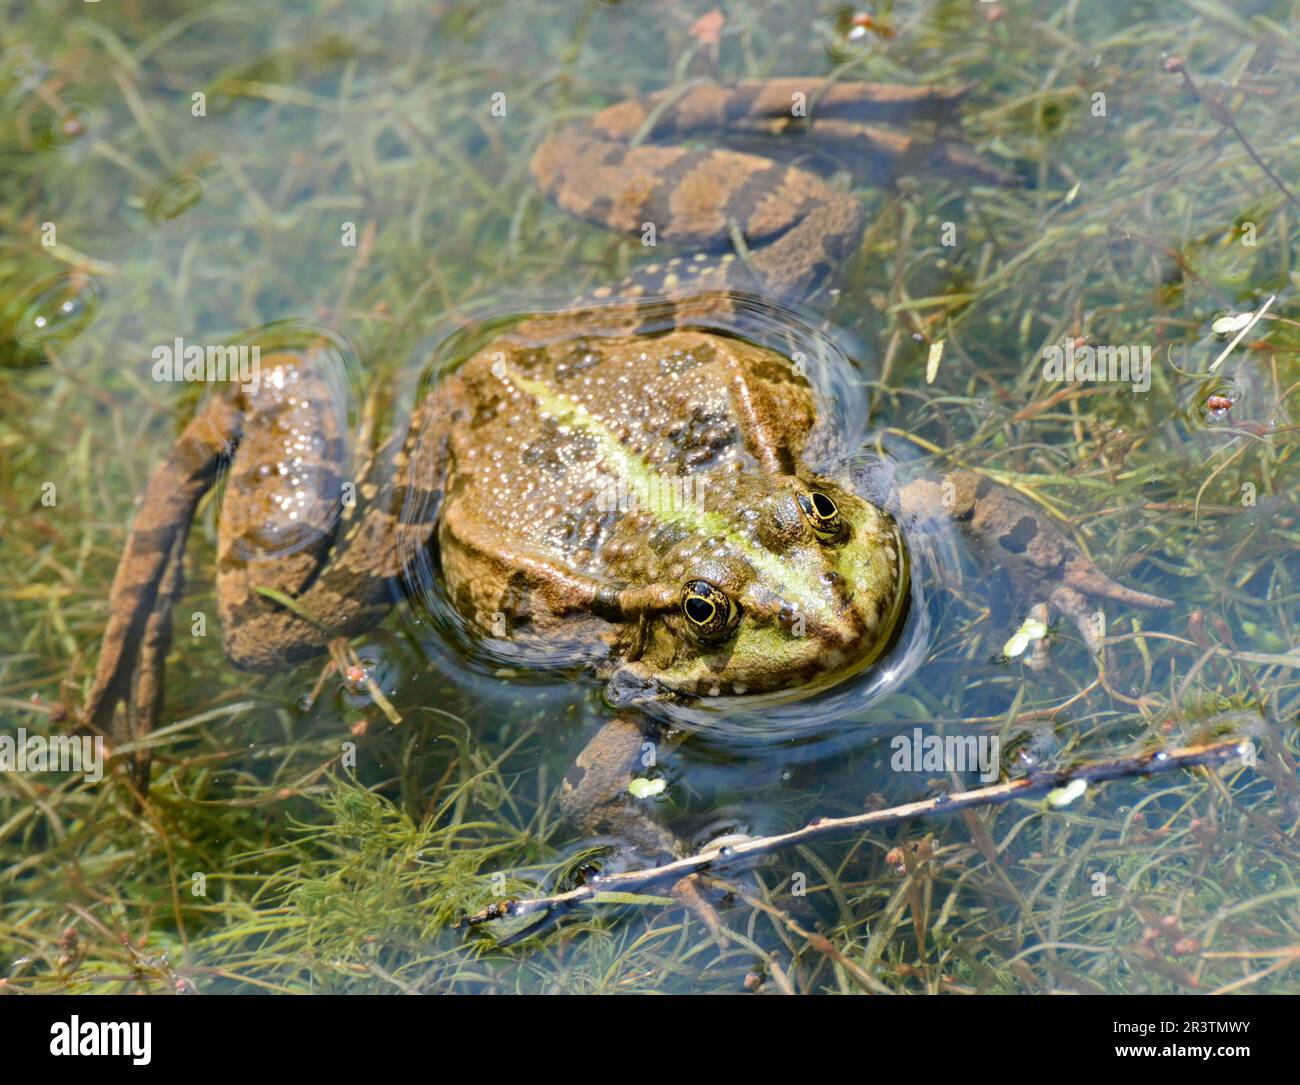 Croaking frog with swollen vocal sacs Stock Photo